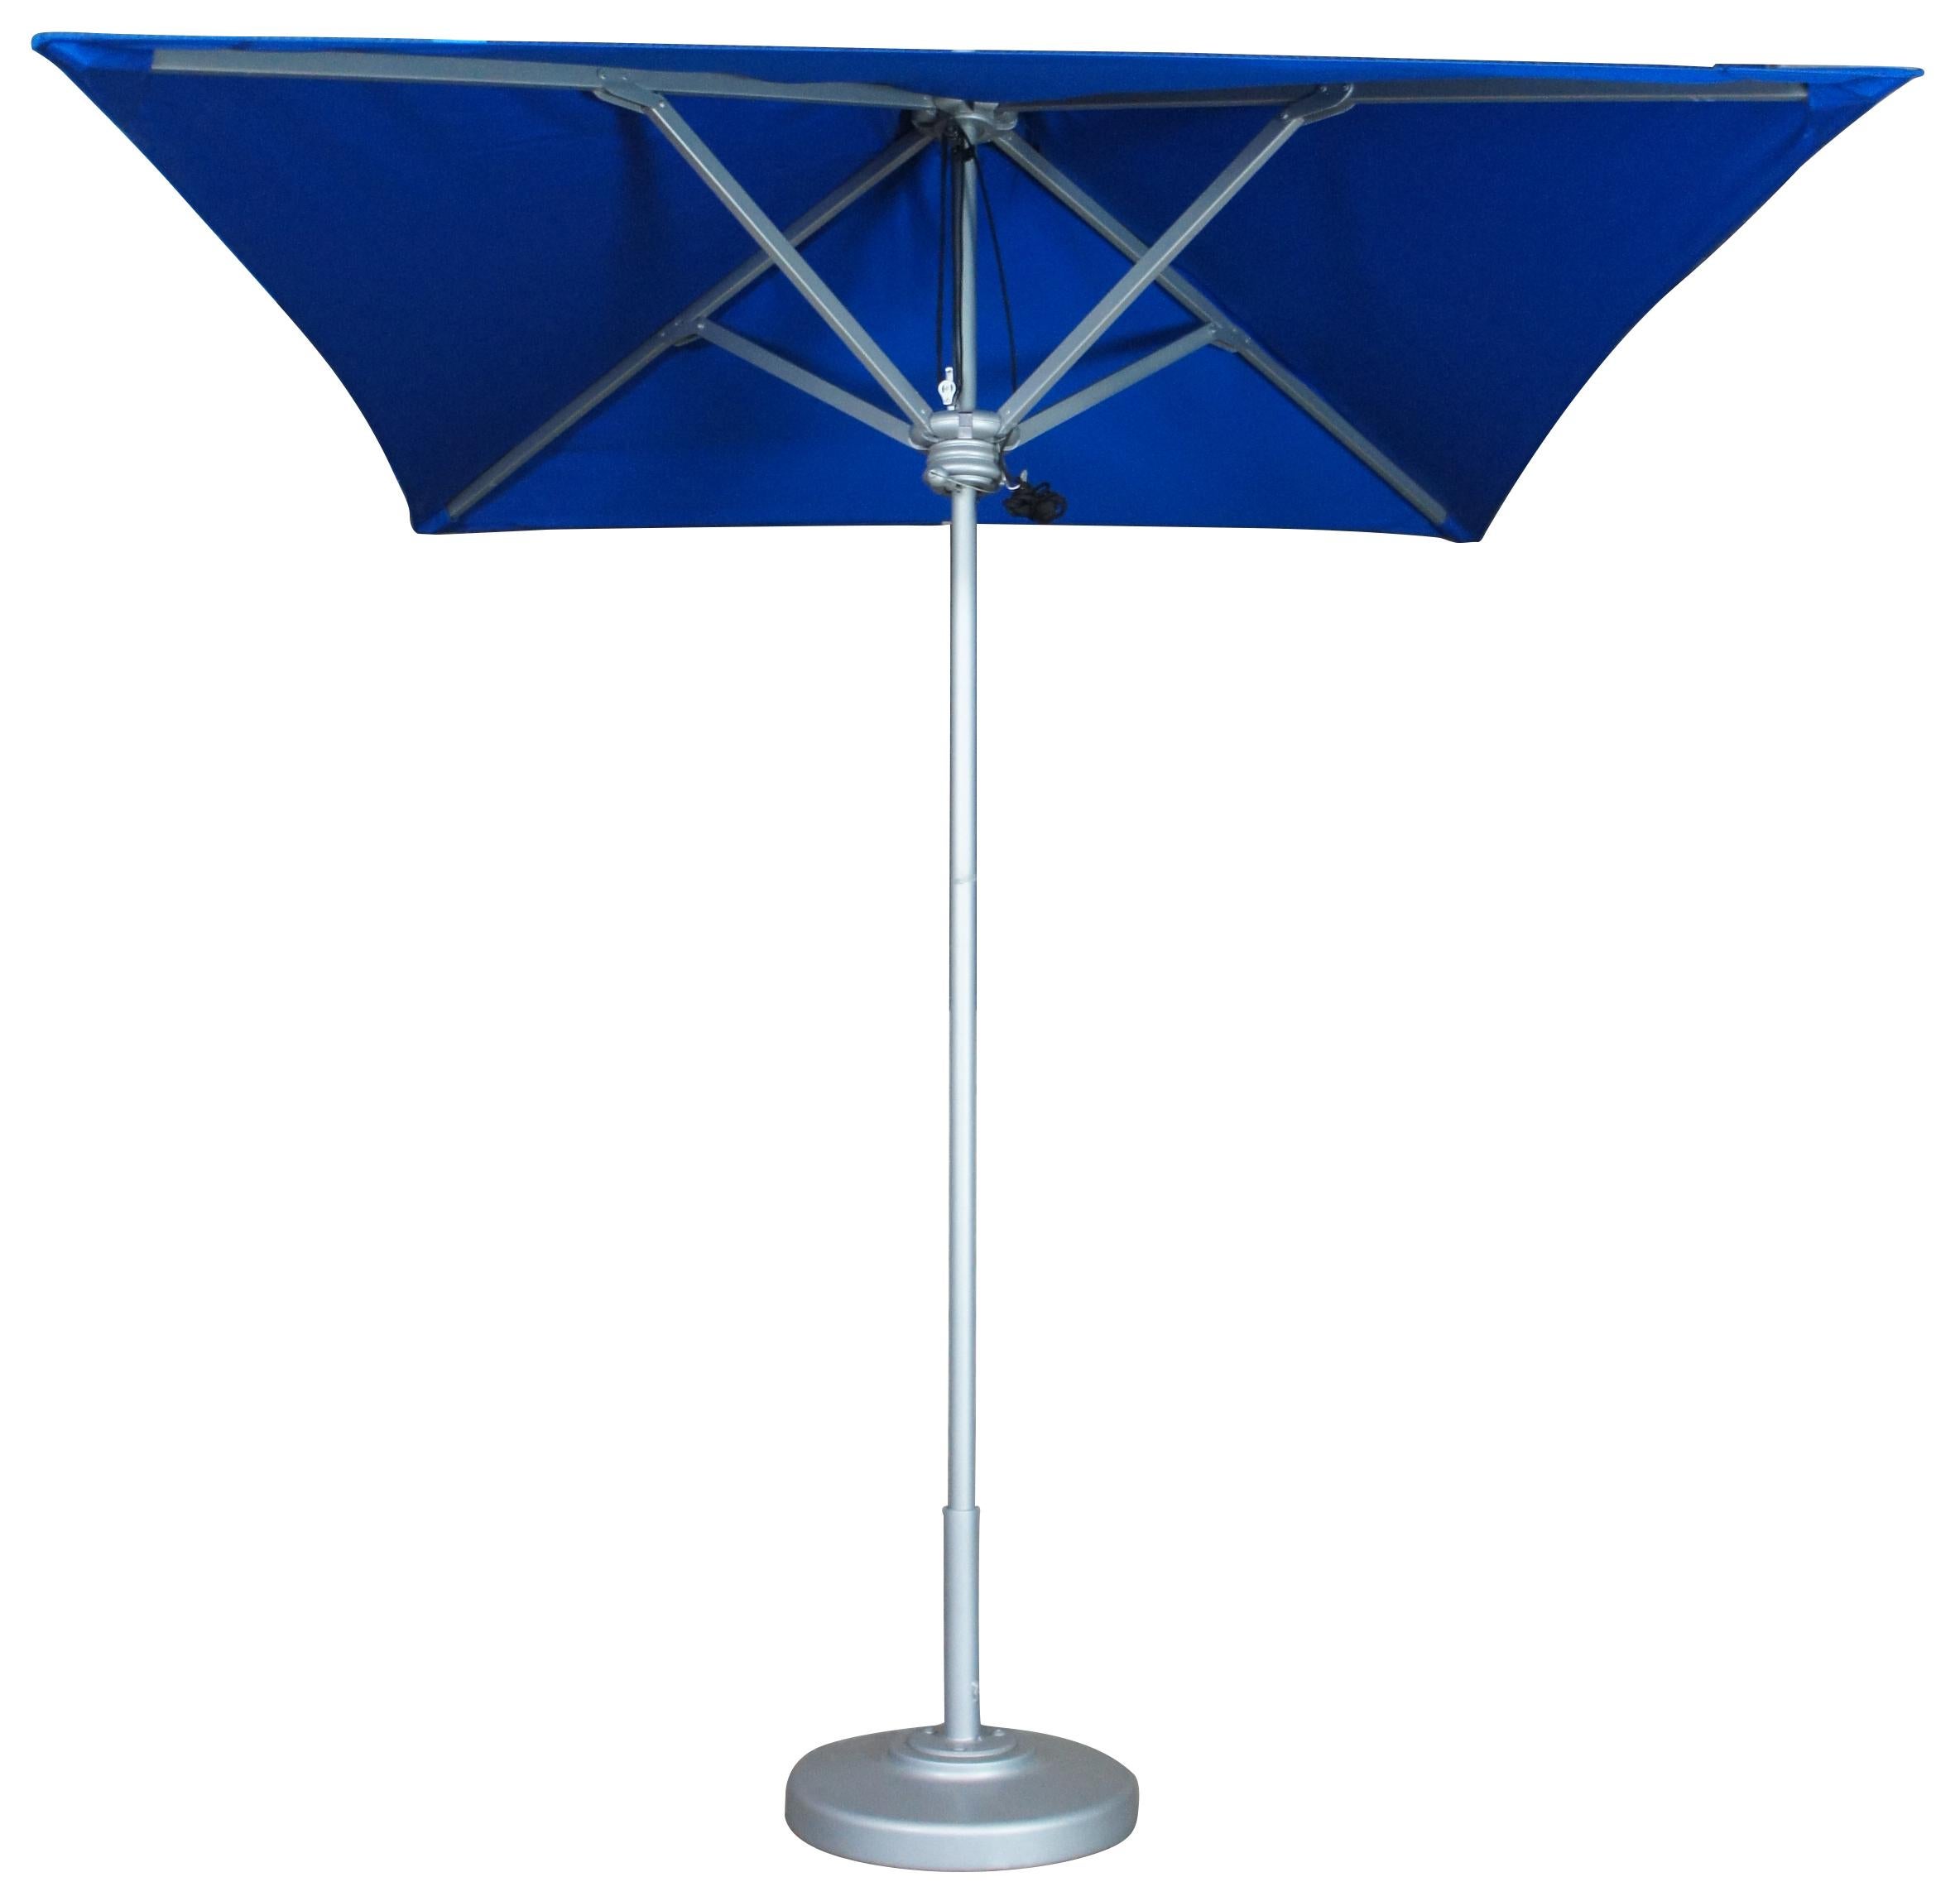 Brown Jordan 7' square single vent umbrella with 1-1/2” aluminum pole and double pulley. Product number 1390-9848, color pacific blue.
   